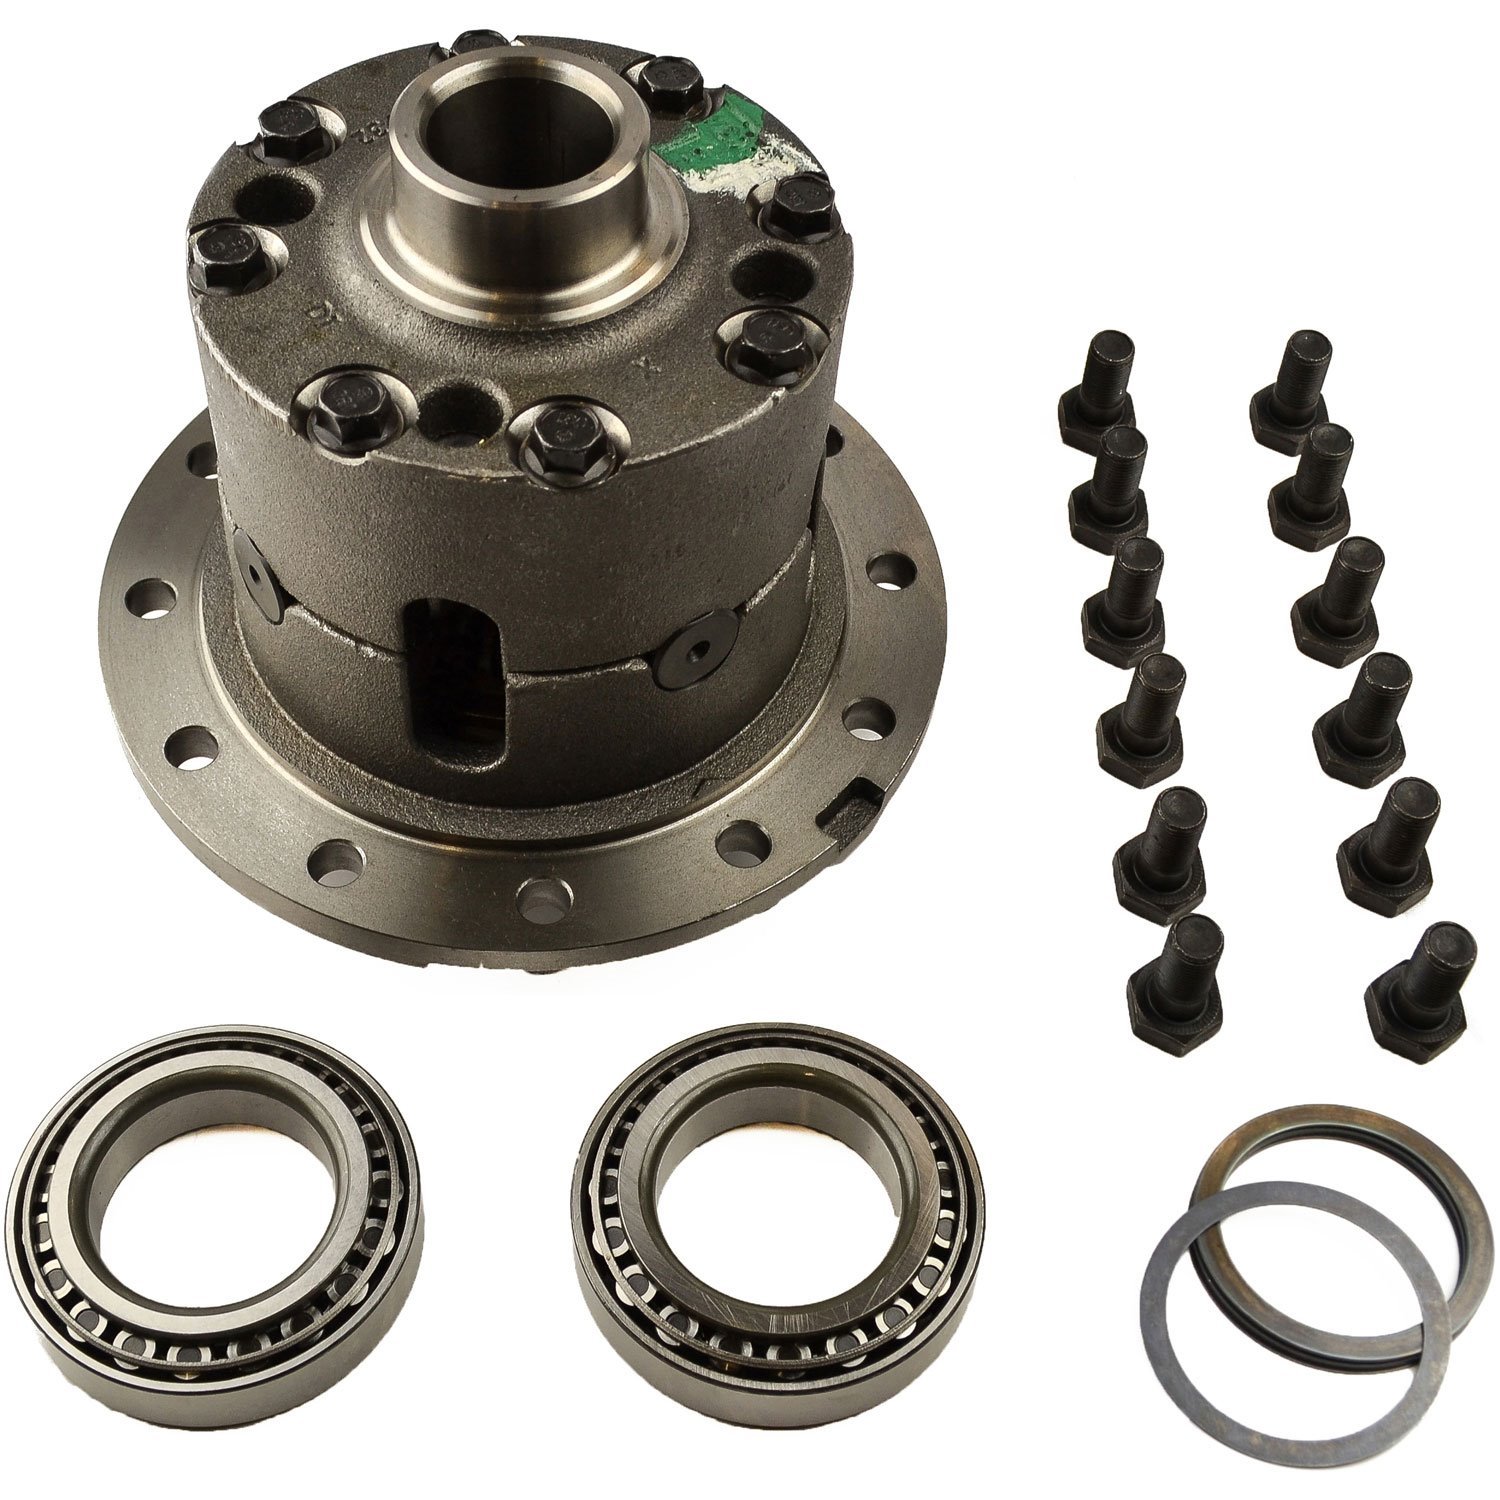 Trac-Lok Limited Slip Differential Assembly Fits: Dana 70